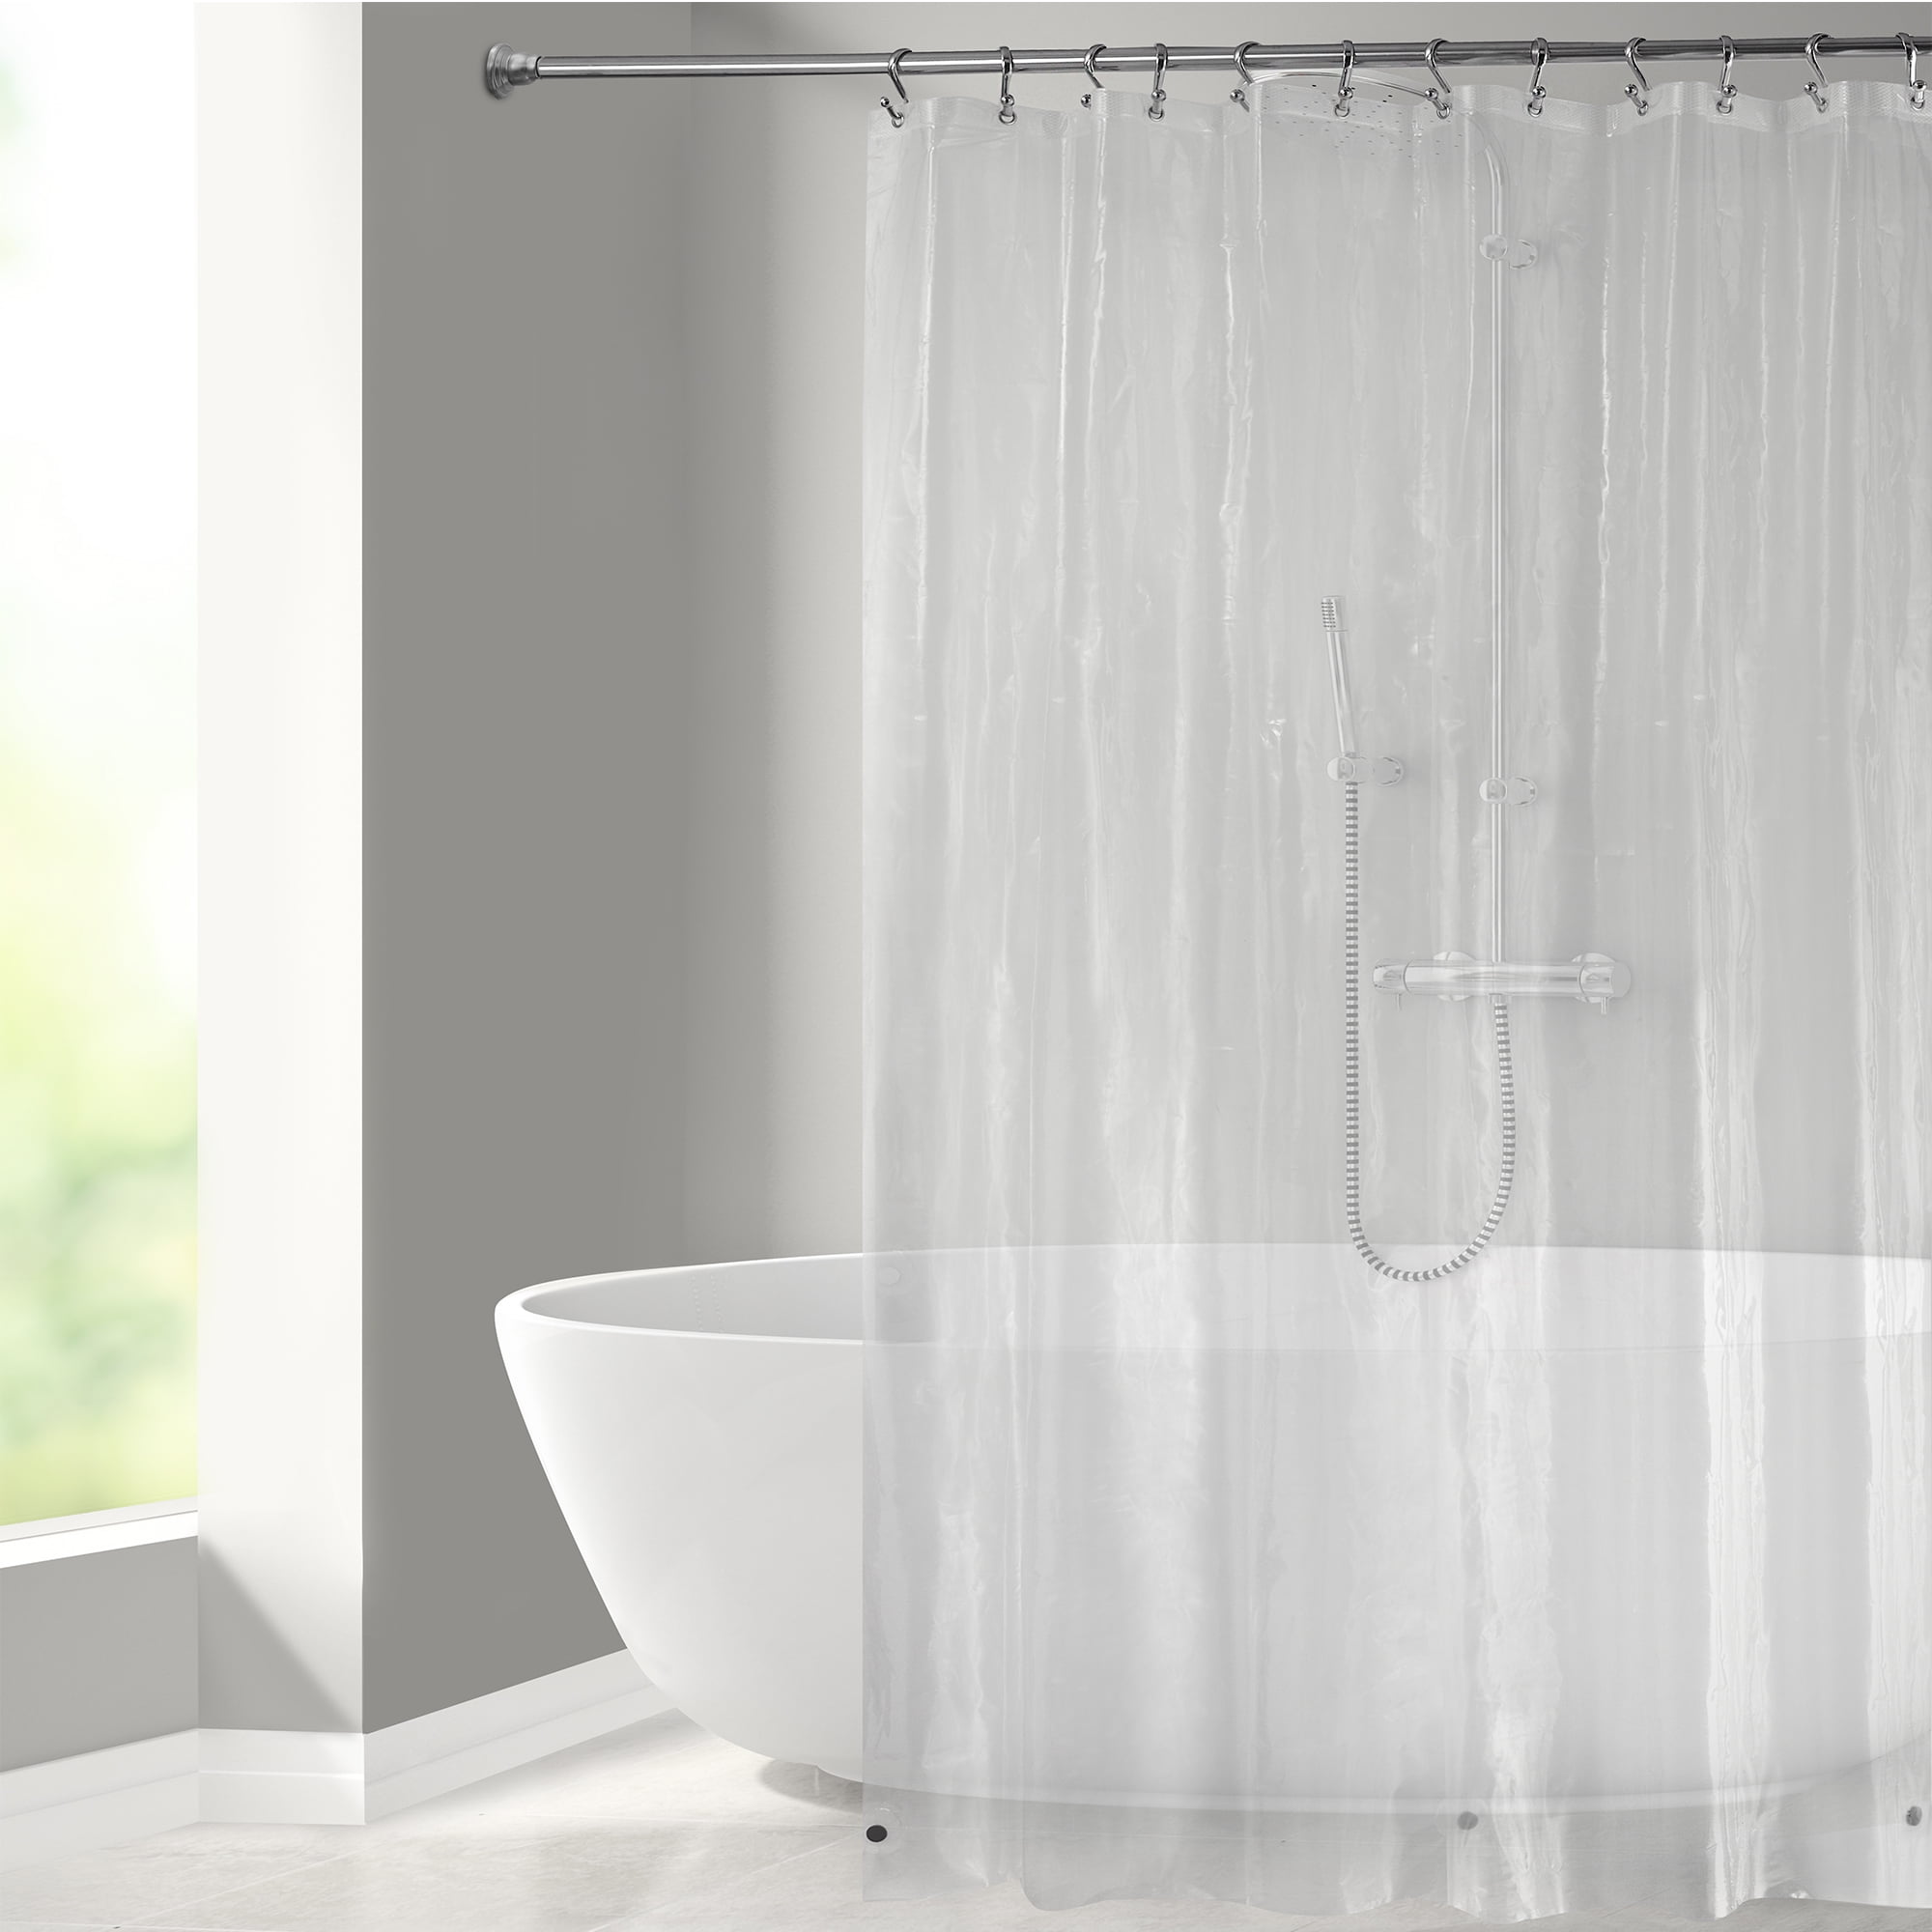 Mainstays Peva Shower Liner Medium, Do Shower Curtains Come With Liners